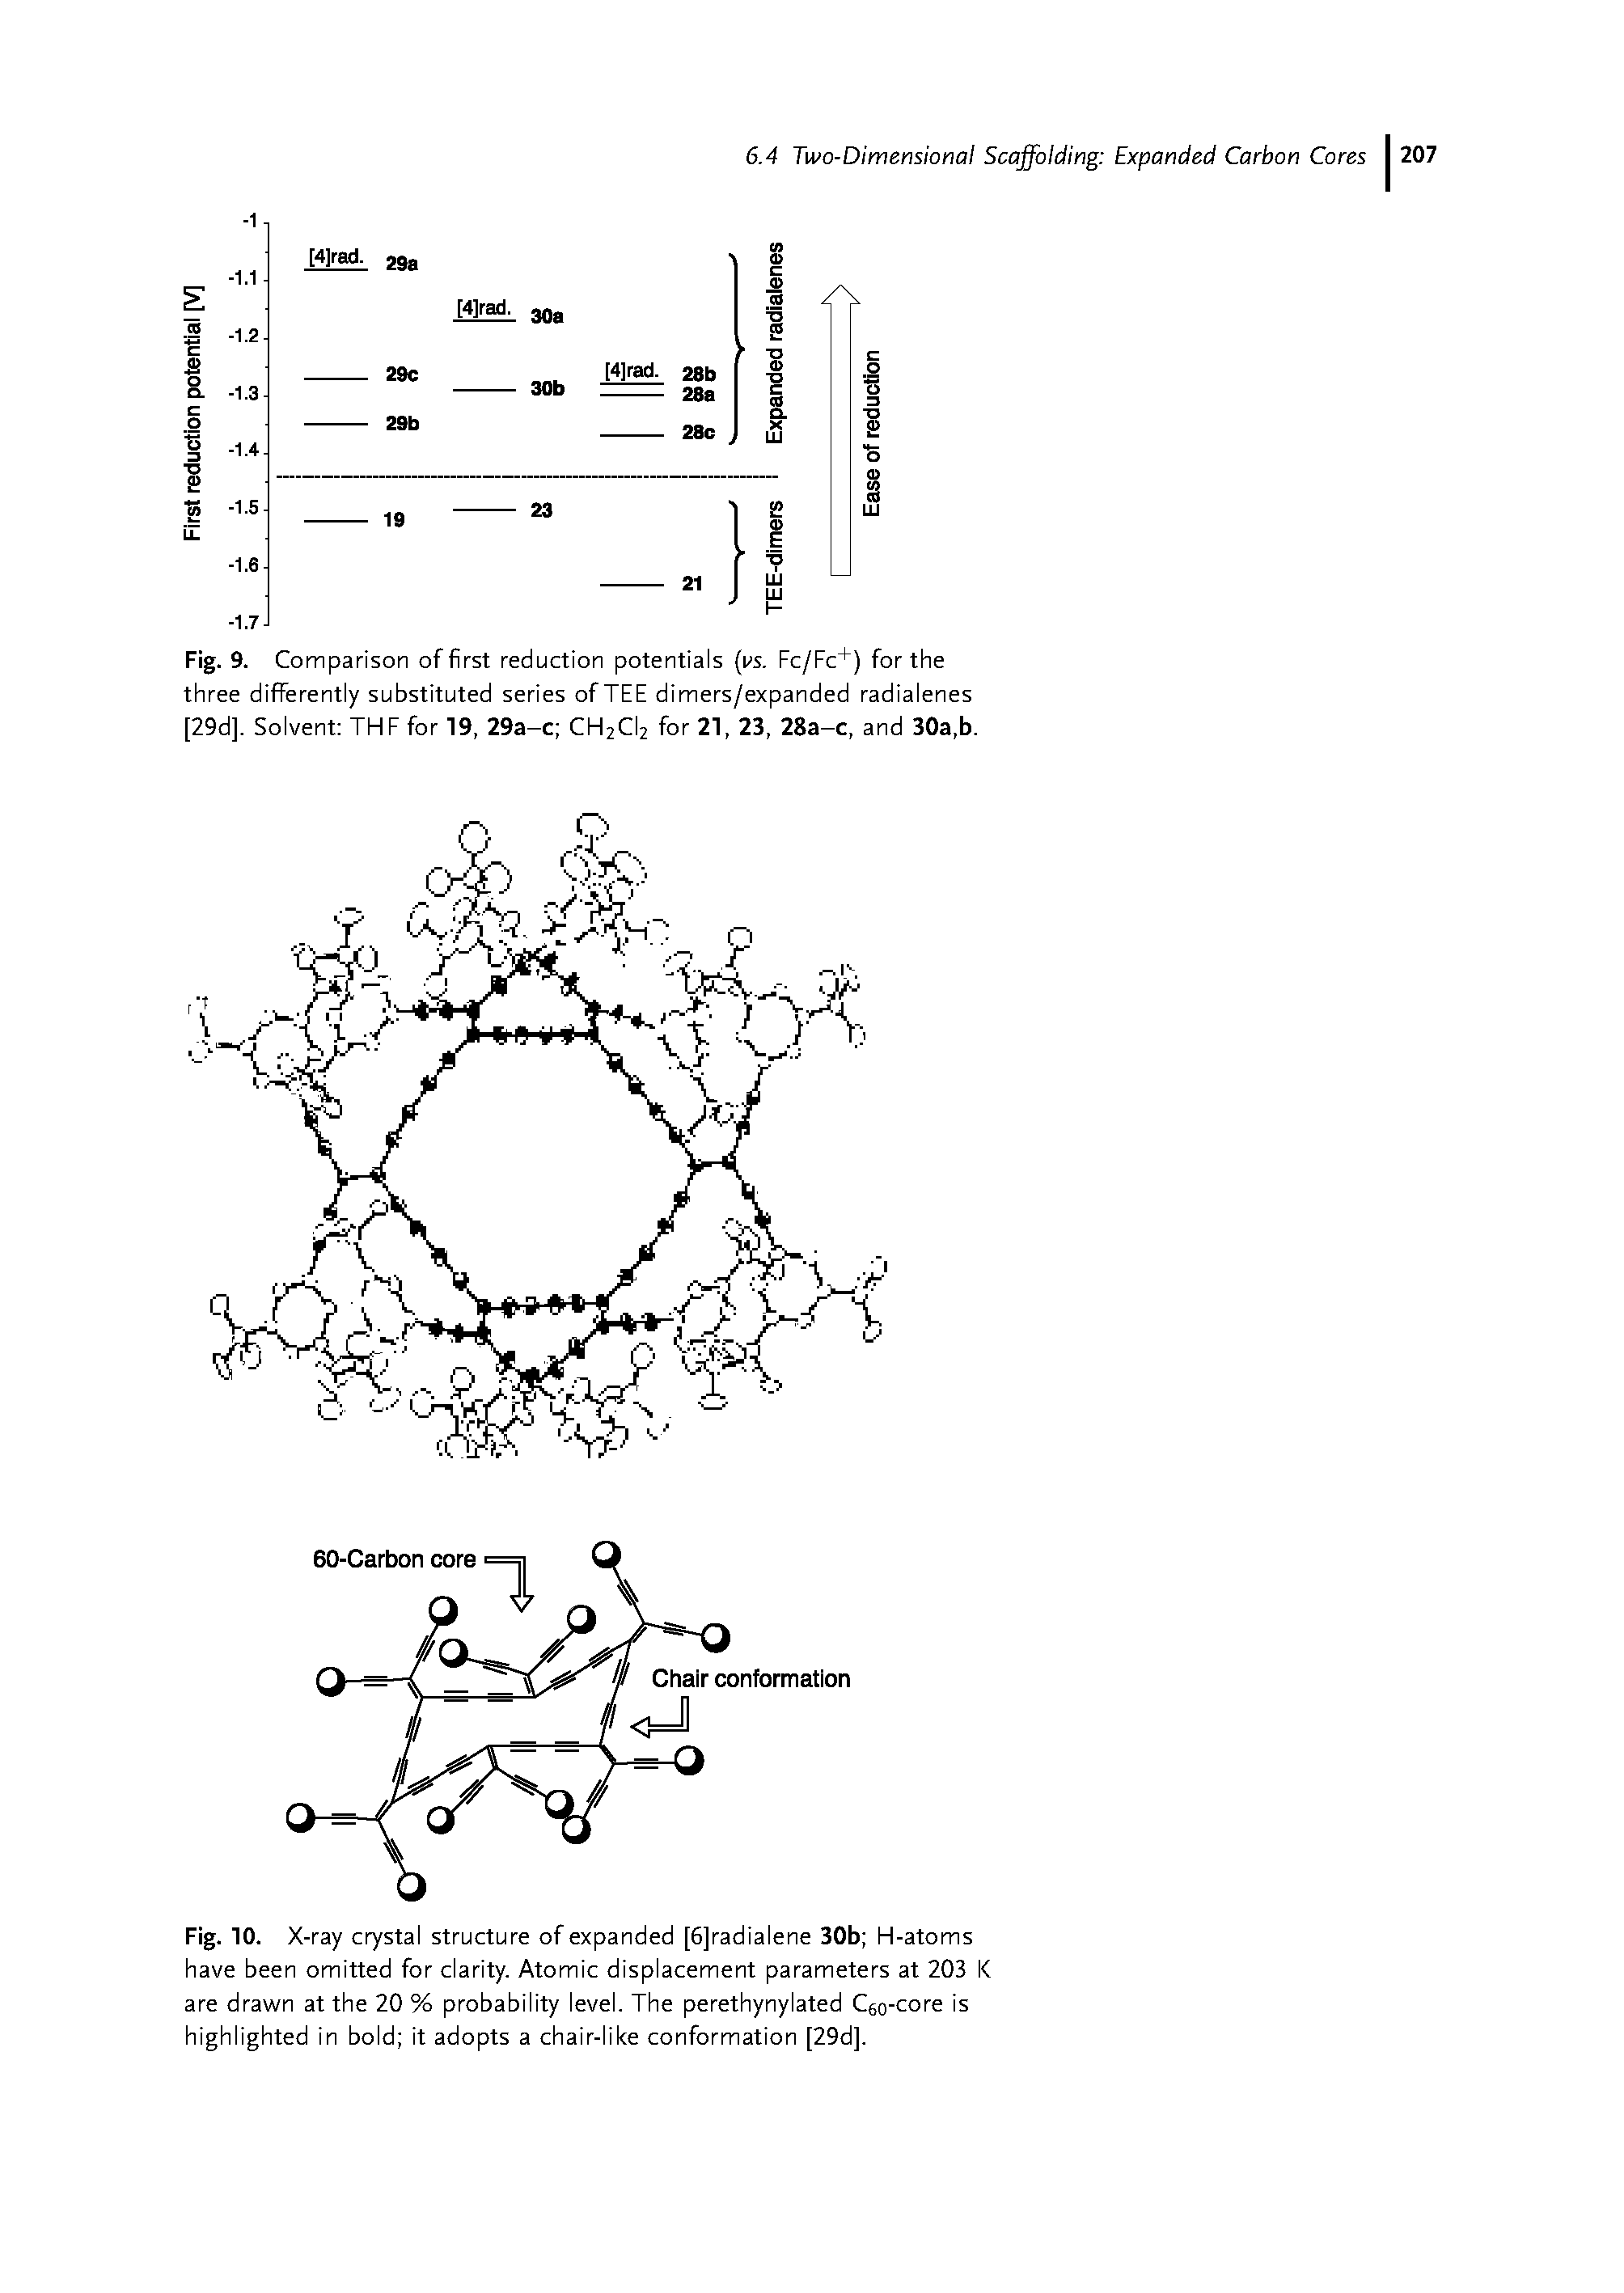 Fig. 10. X -ray crystal structure of expanded [6]radialene 30b H-atoms have been omitted for clarity. Atomic displacement parameters at 203 K are drawn at the 20 % probability level. The perethynylated C6o-core is highlighted in bold it adopts a chair-like conformation [29d].